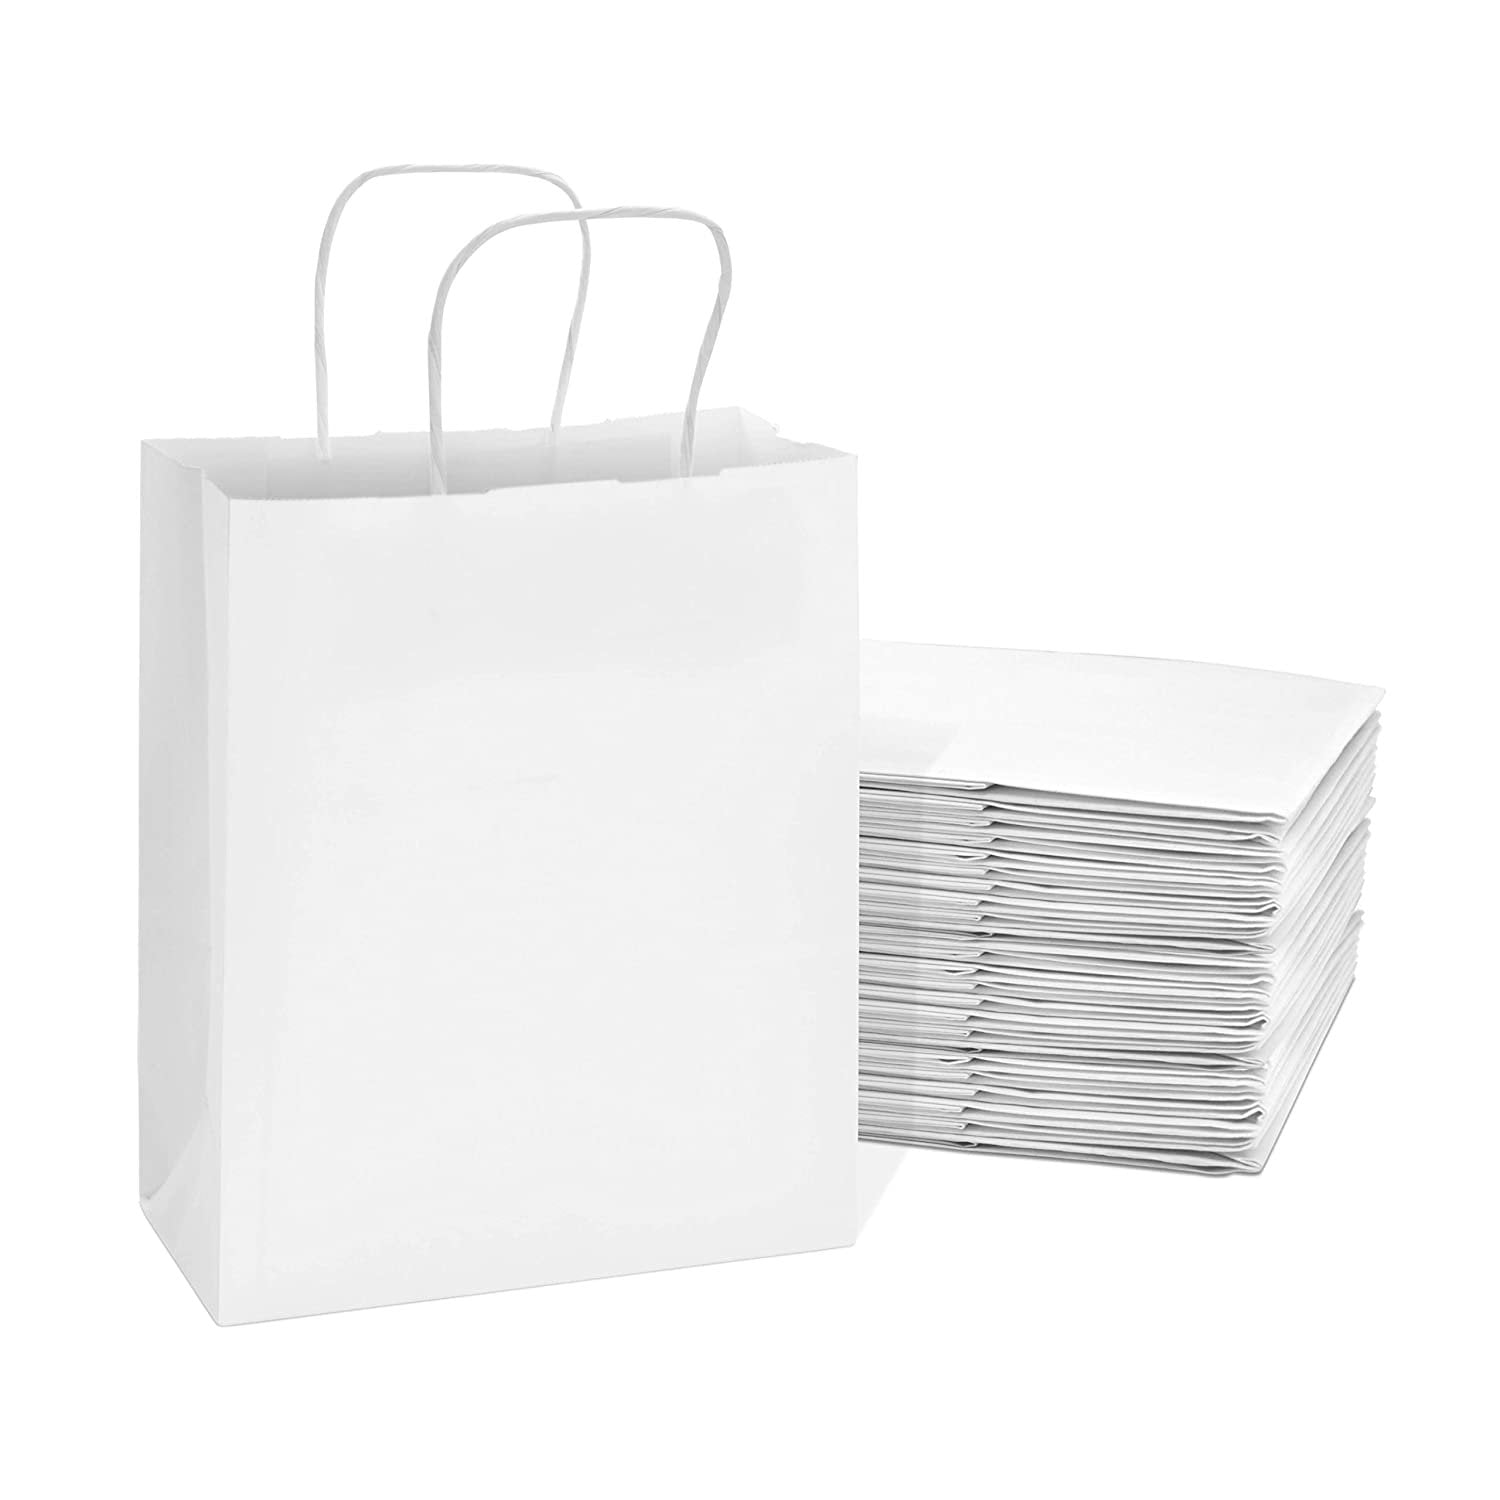 9 Party Paper Carrier Bags with Twisted Paper Handles Size 20 x 18 x 8 